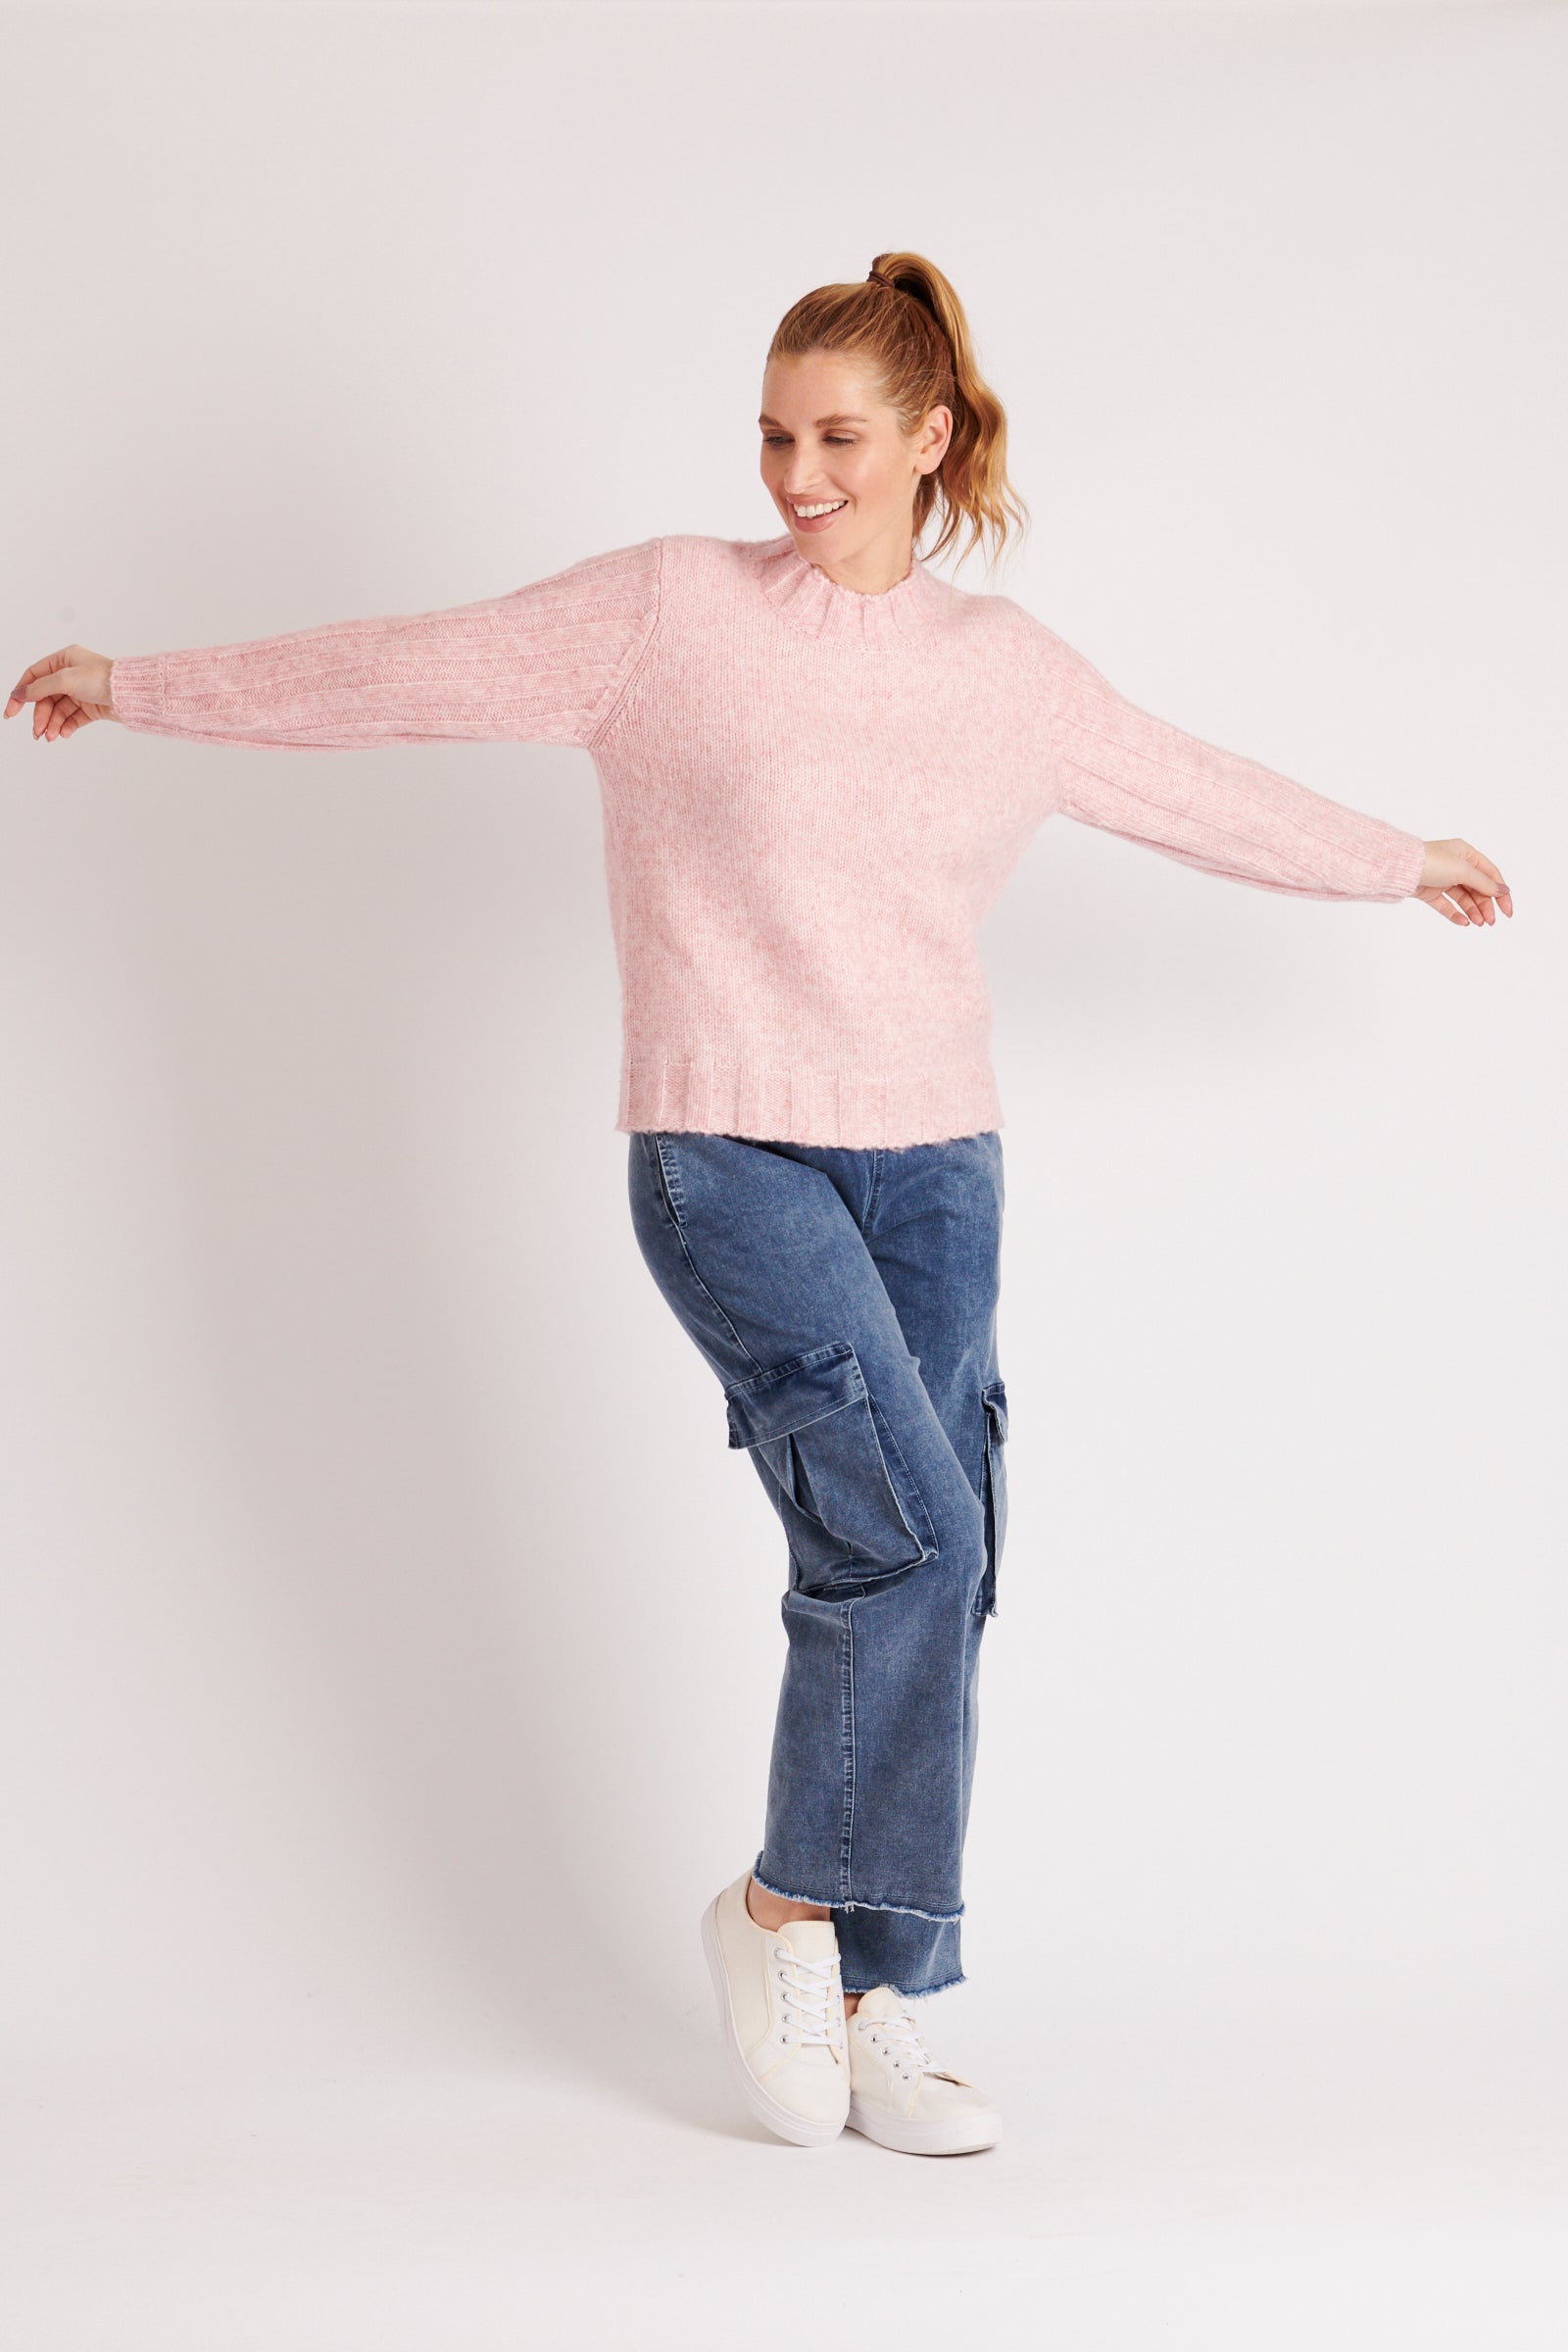 Rib Sleeve Jumper - Light Pink-Knitwear & Jumpers-A Little Birdie Told Me-The Bay Room